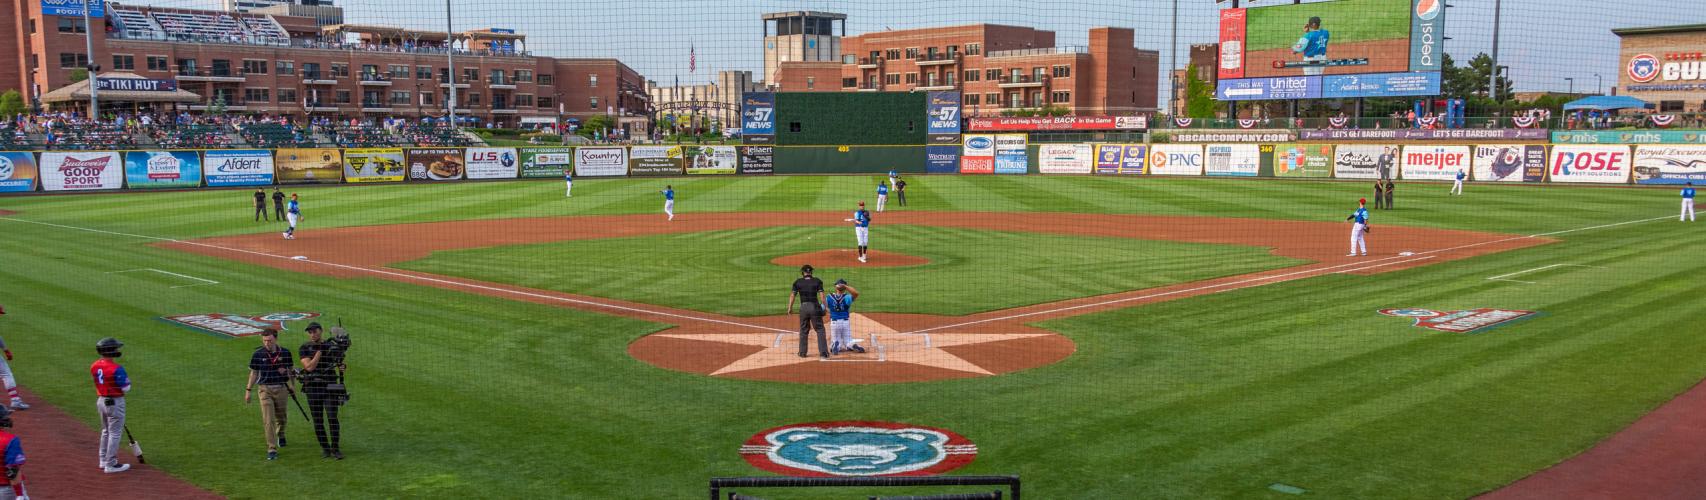 Popular Weekly Promotions Return for South Bend Cubs Games in 2023